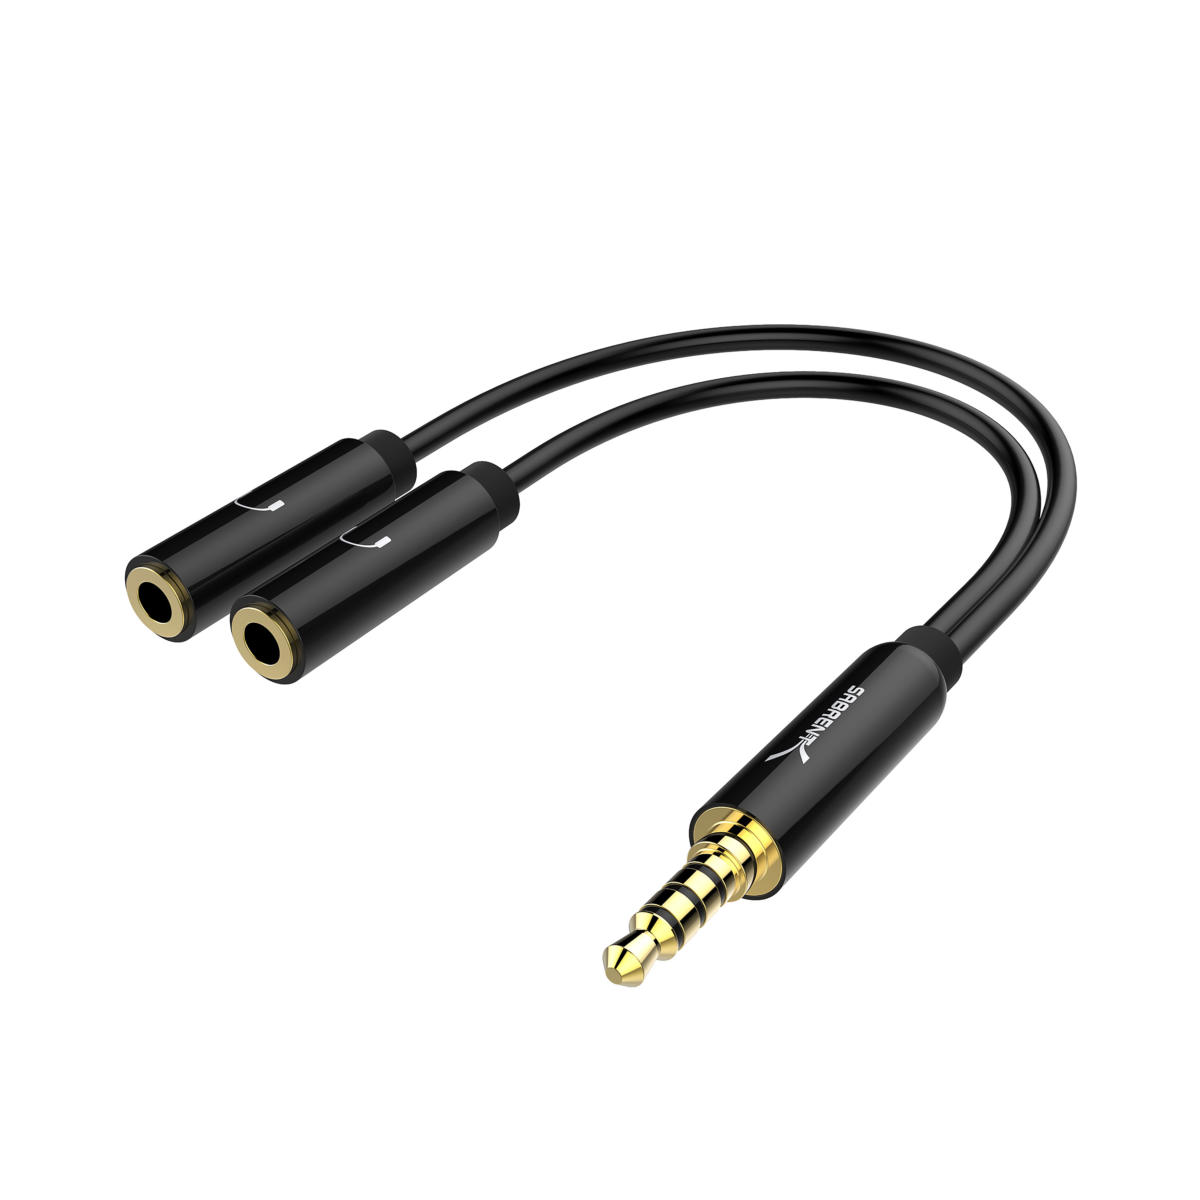 USB to 2 X 3.5mm Audio Stereo Splitter - Sabrent